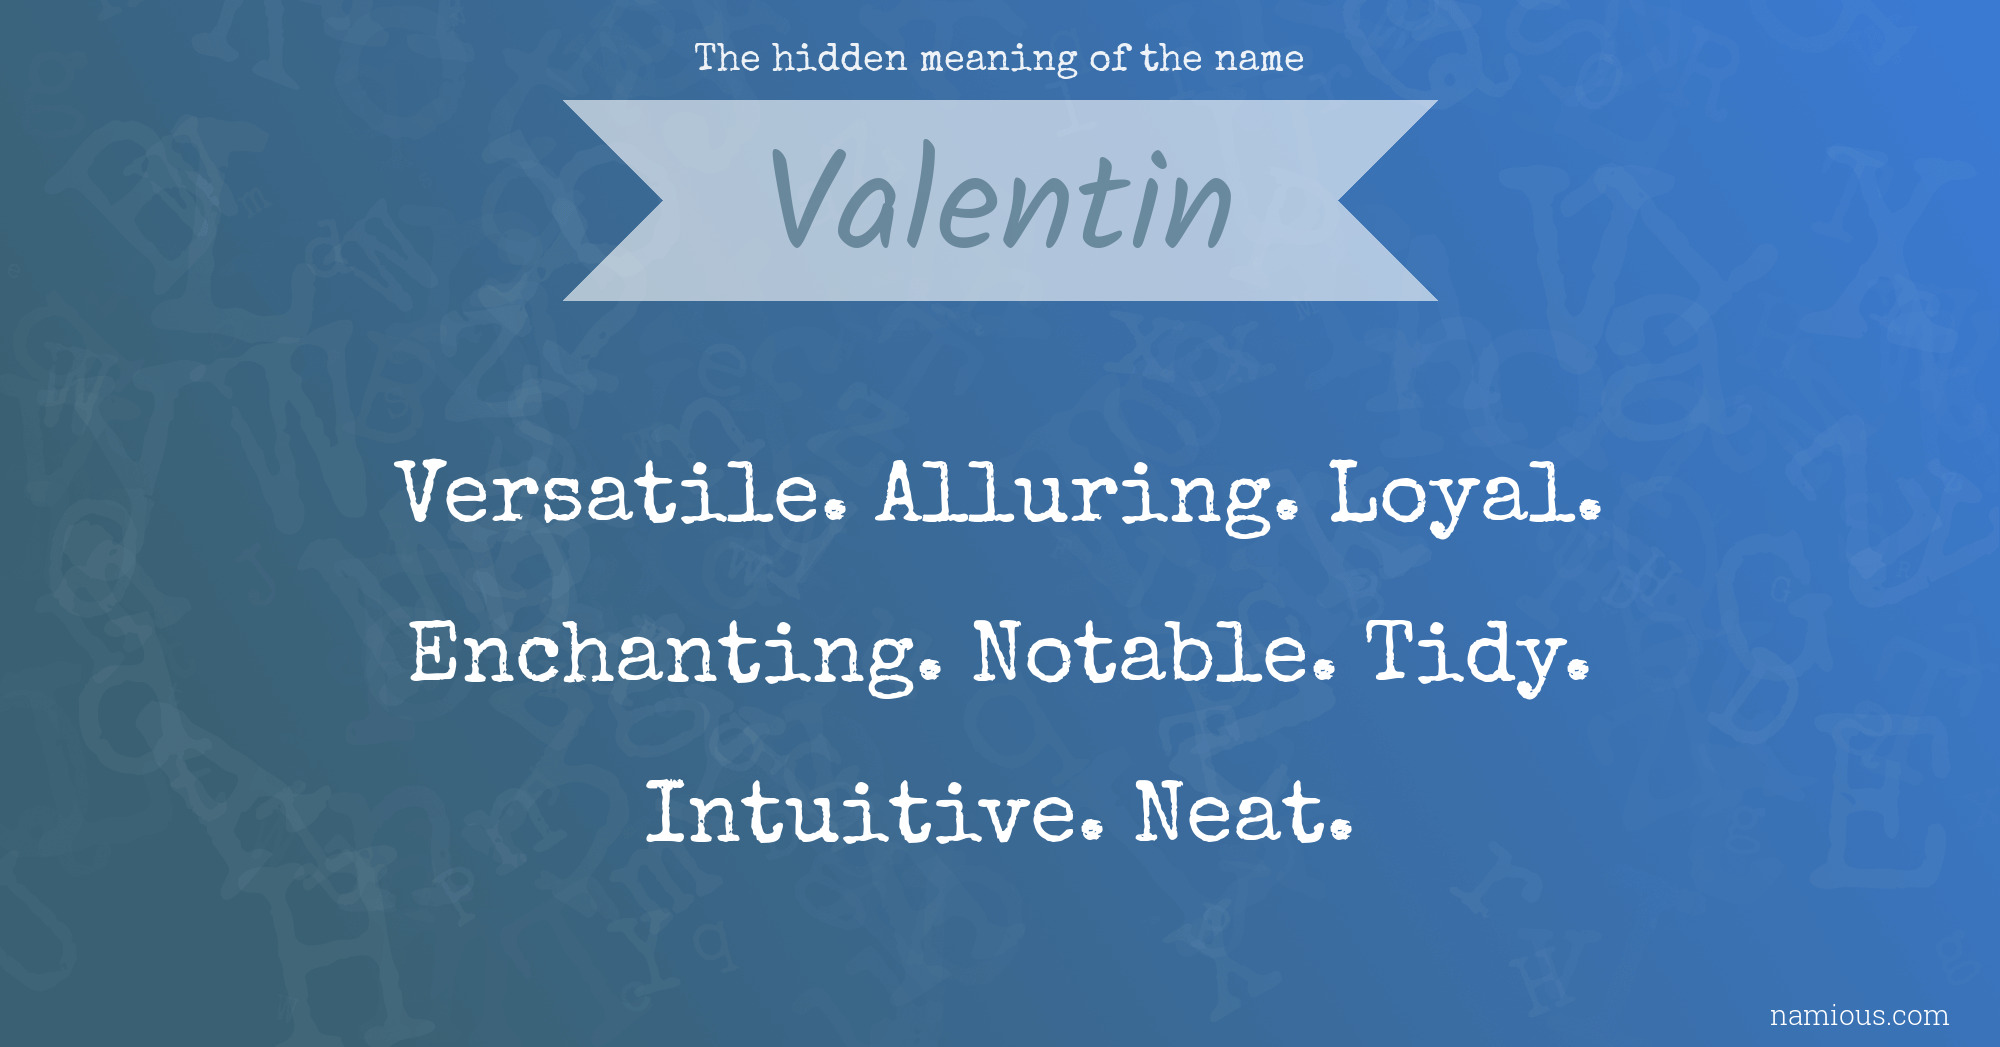 The hidden meaning of the name Valentin